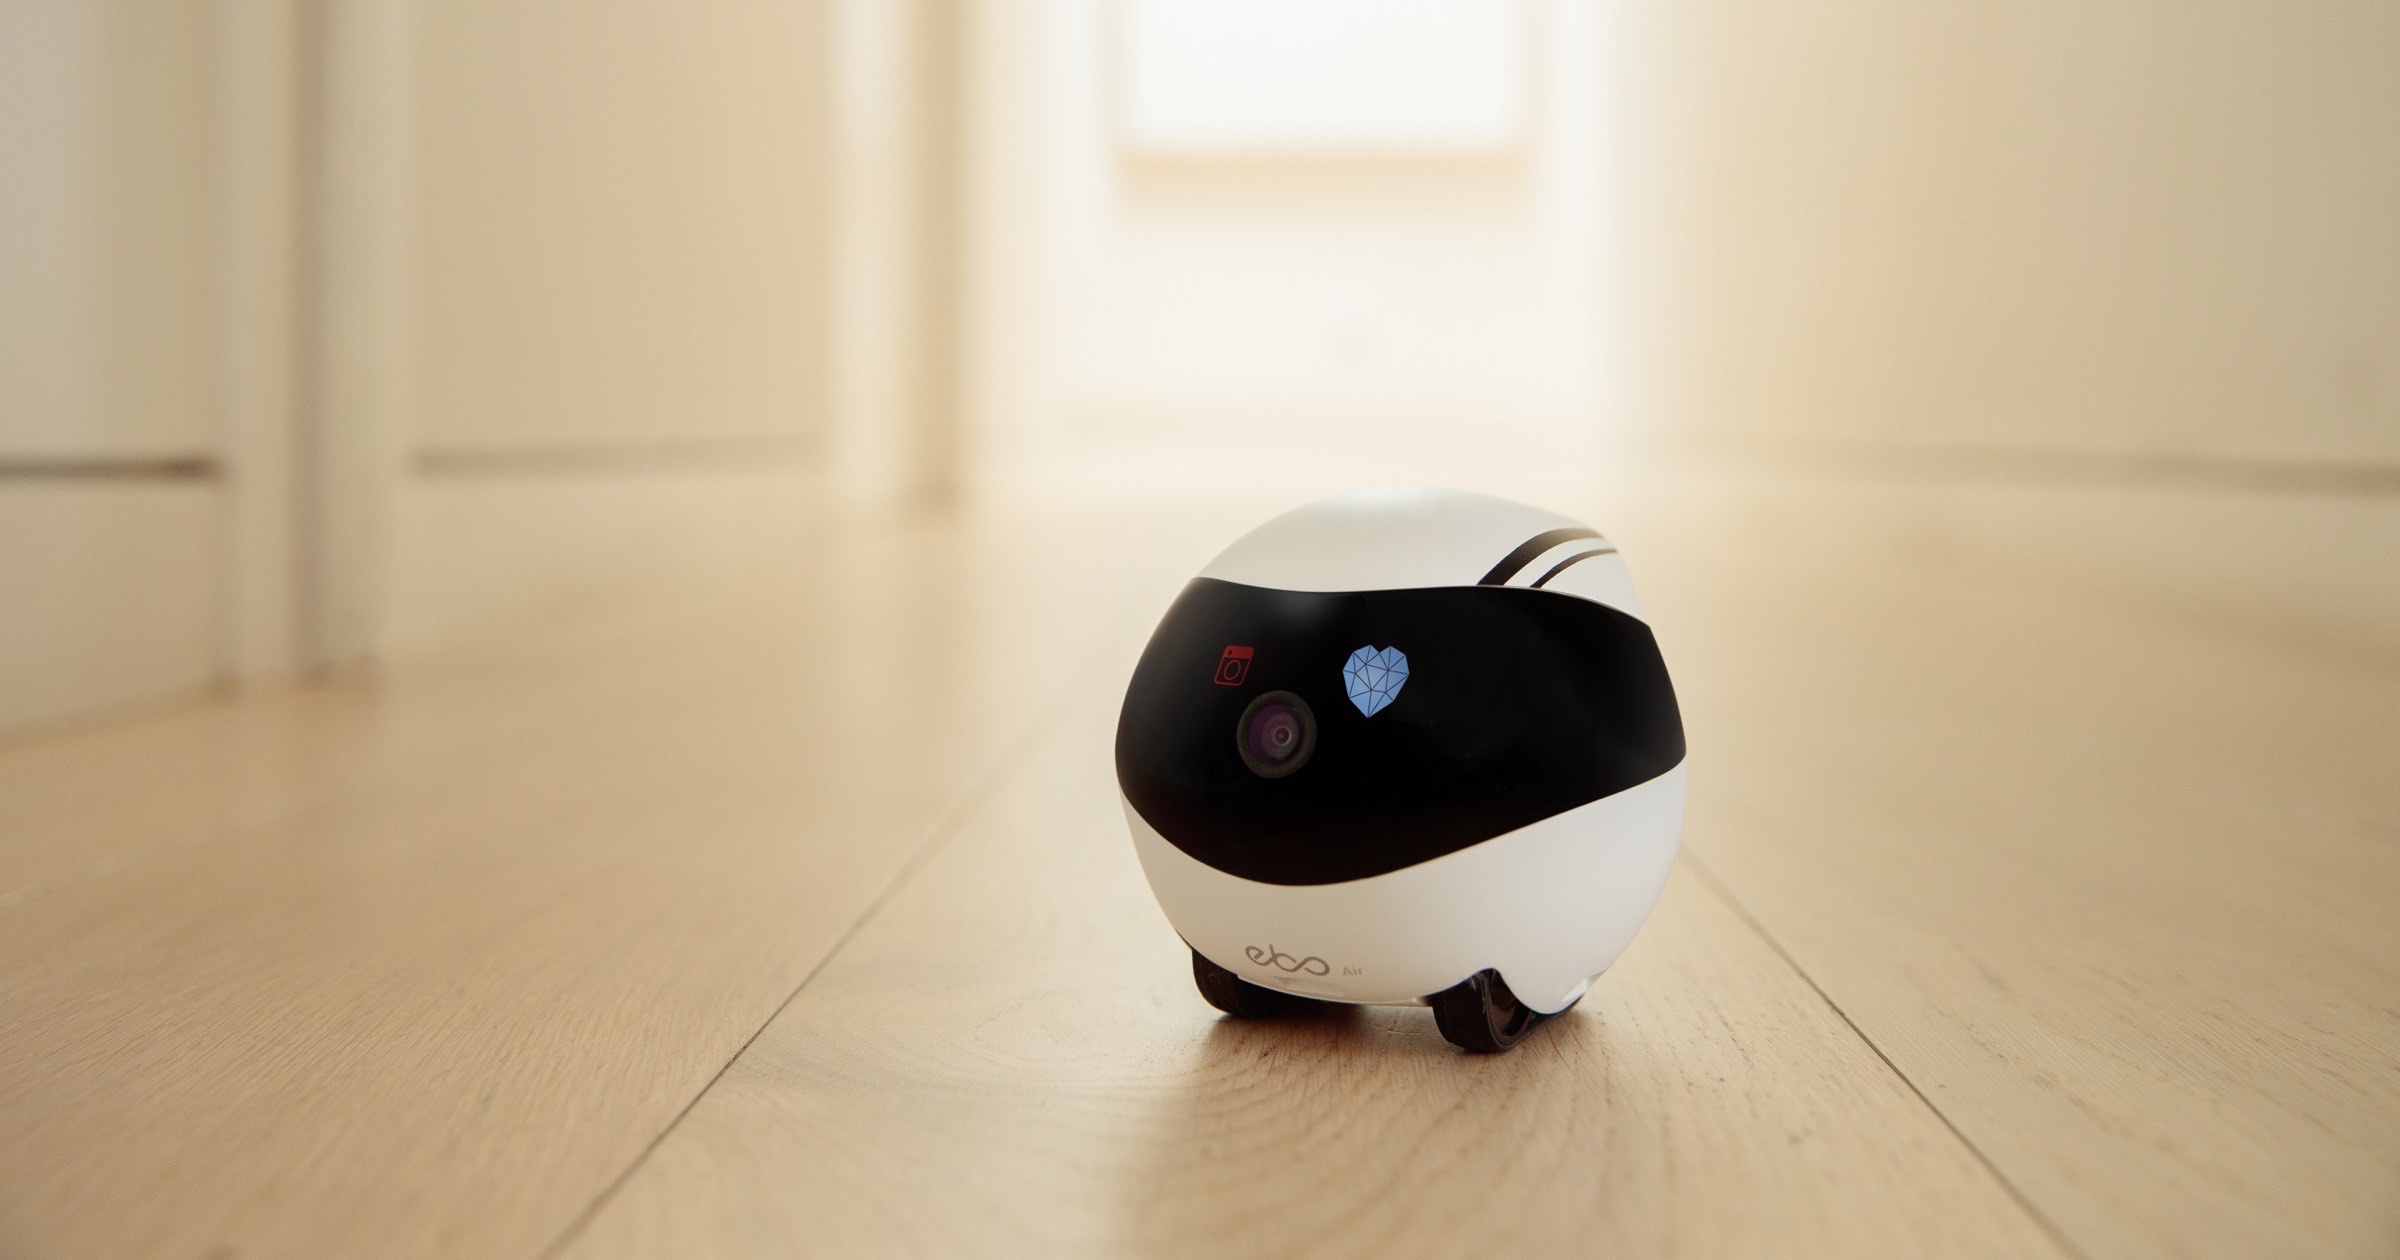 EBO is a Friendly Remote Robot for Families